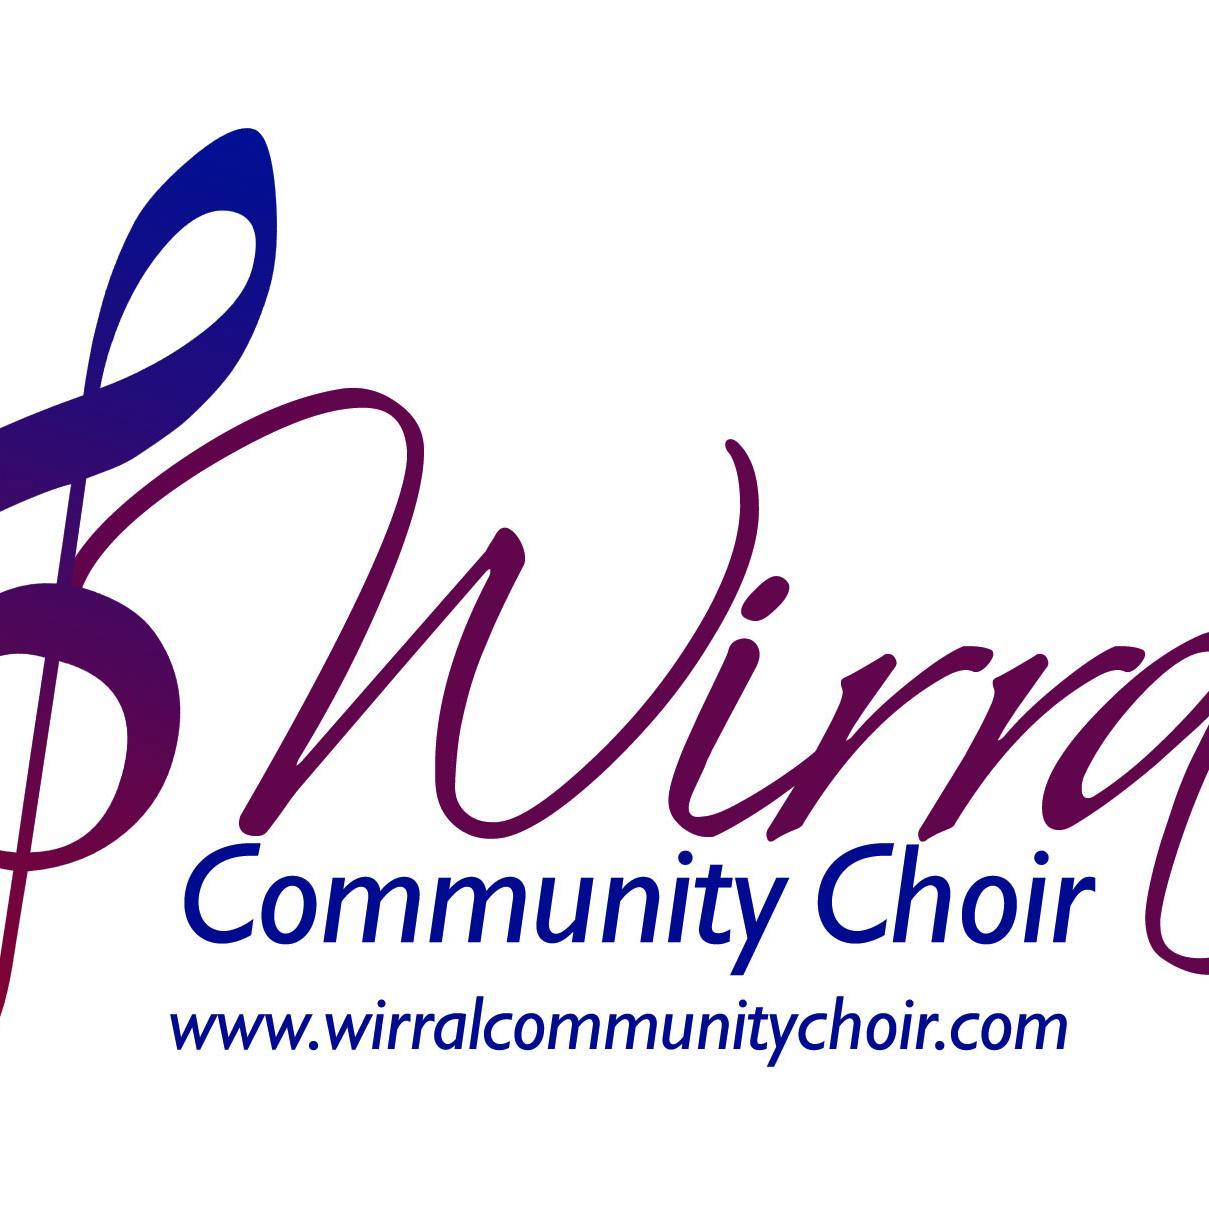 We are a 100 strong community choir singing a wide range of songs from opera to rock.